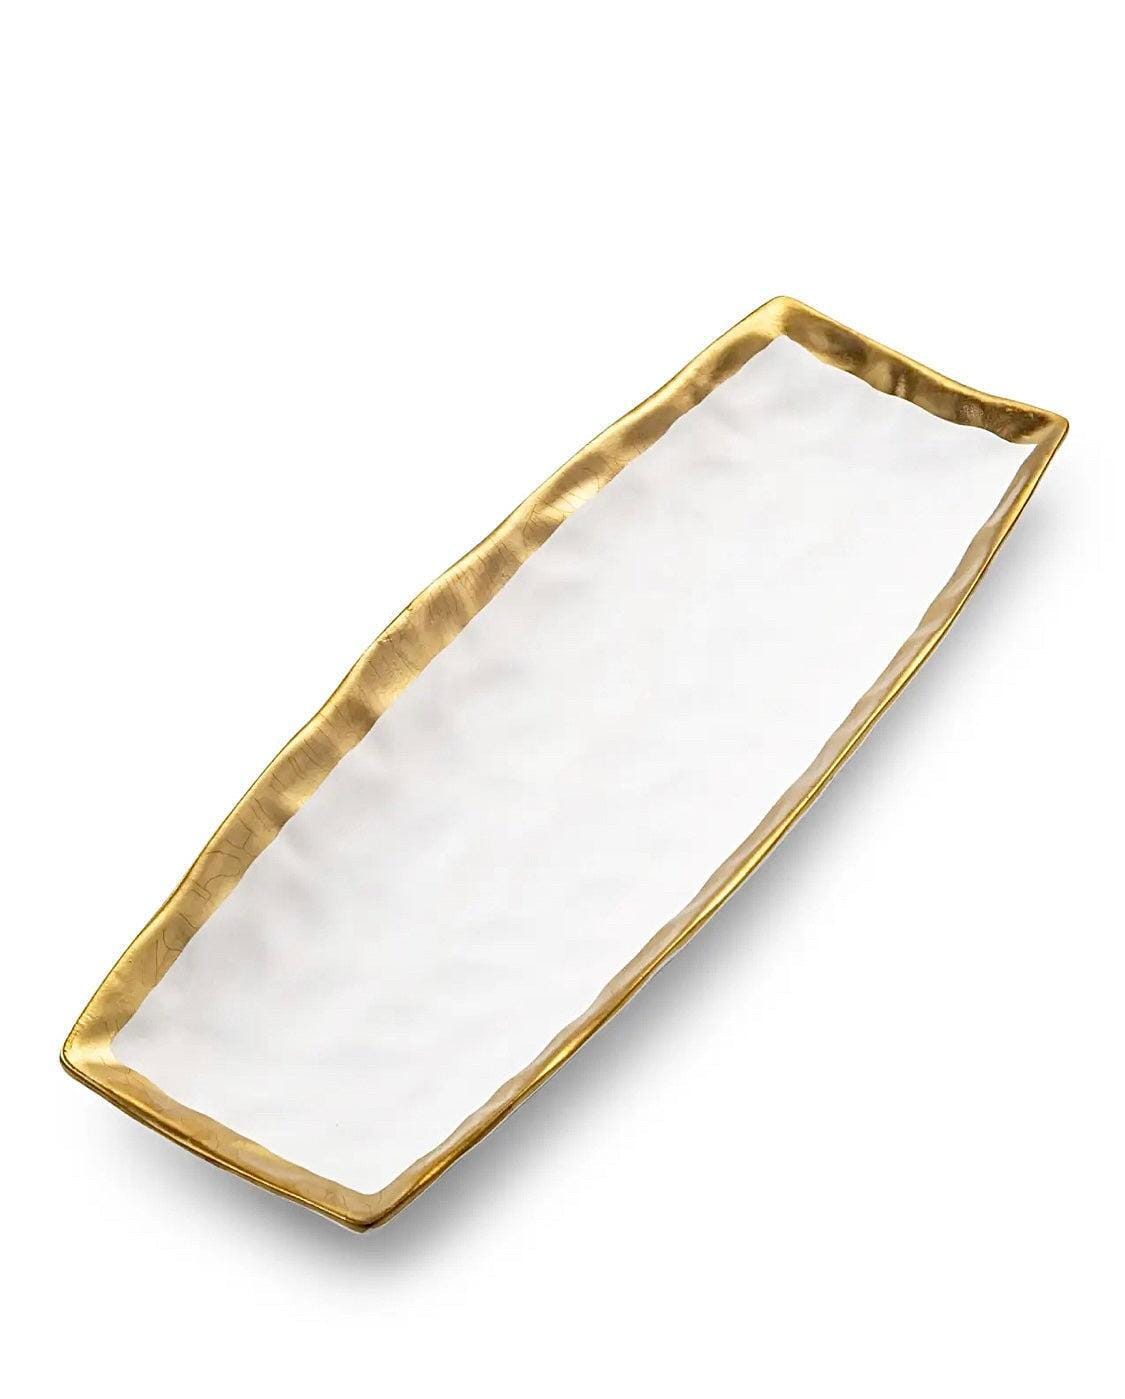 White Porcelain Oblong Tray with Gold Rim 15.5”L x 6”W Snack Bowls High Class Touch - Home Decor 